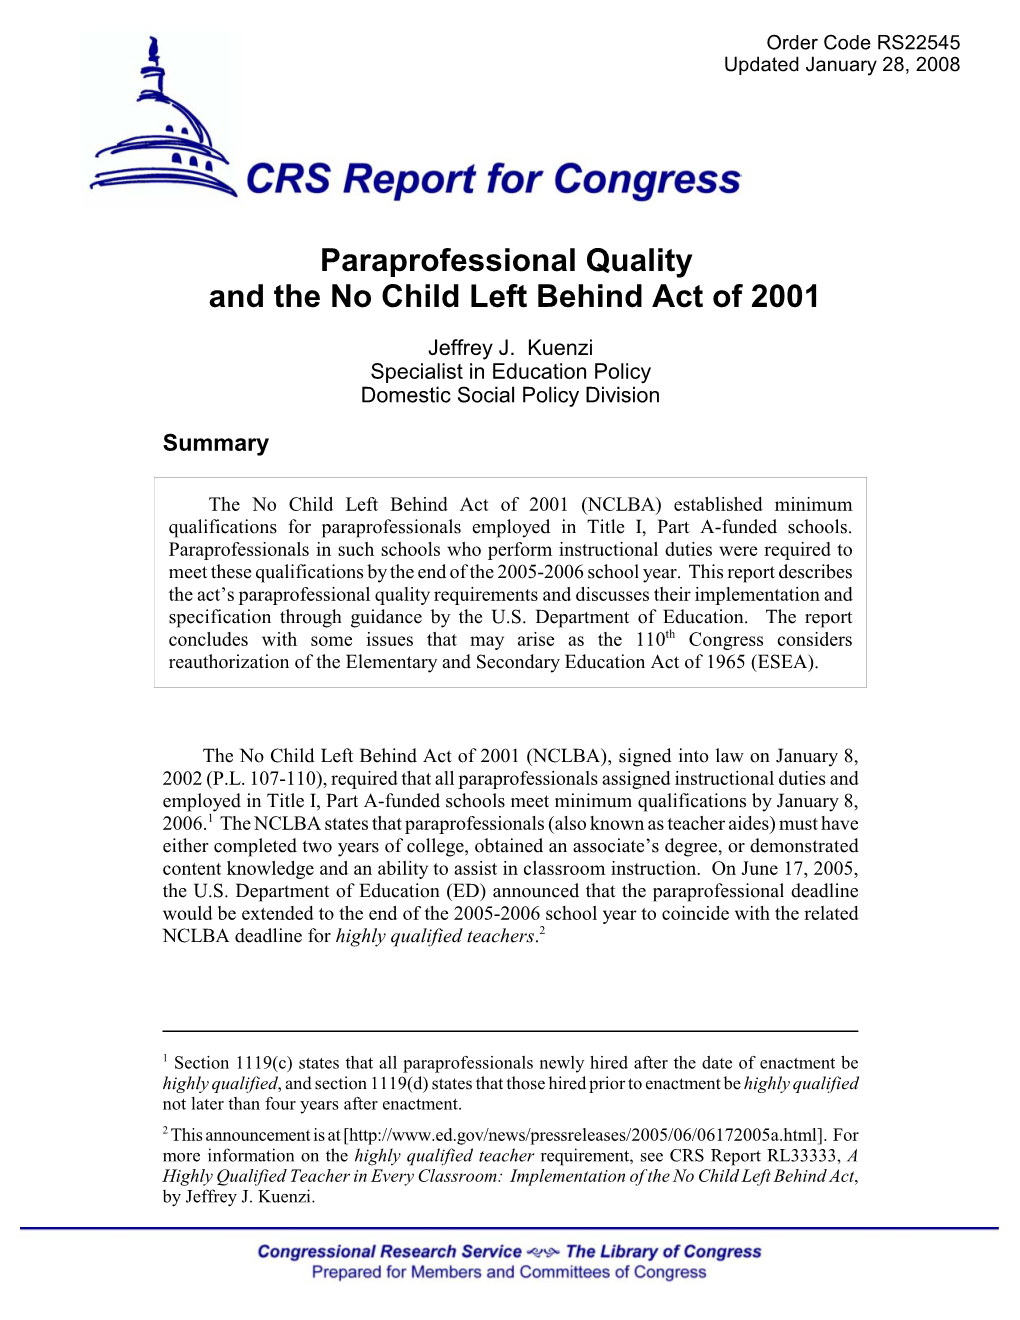 Paraprofessional Quality and the No Child Left Behind Act of 2001